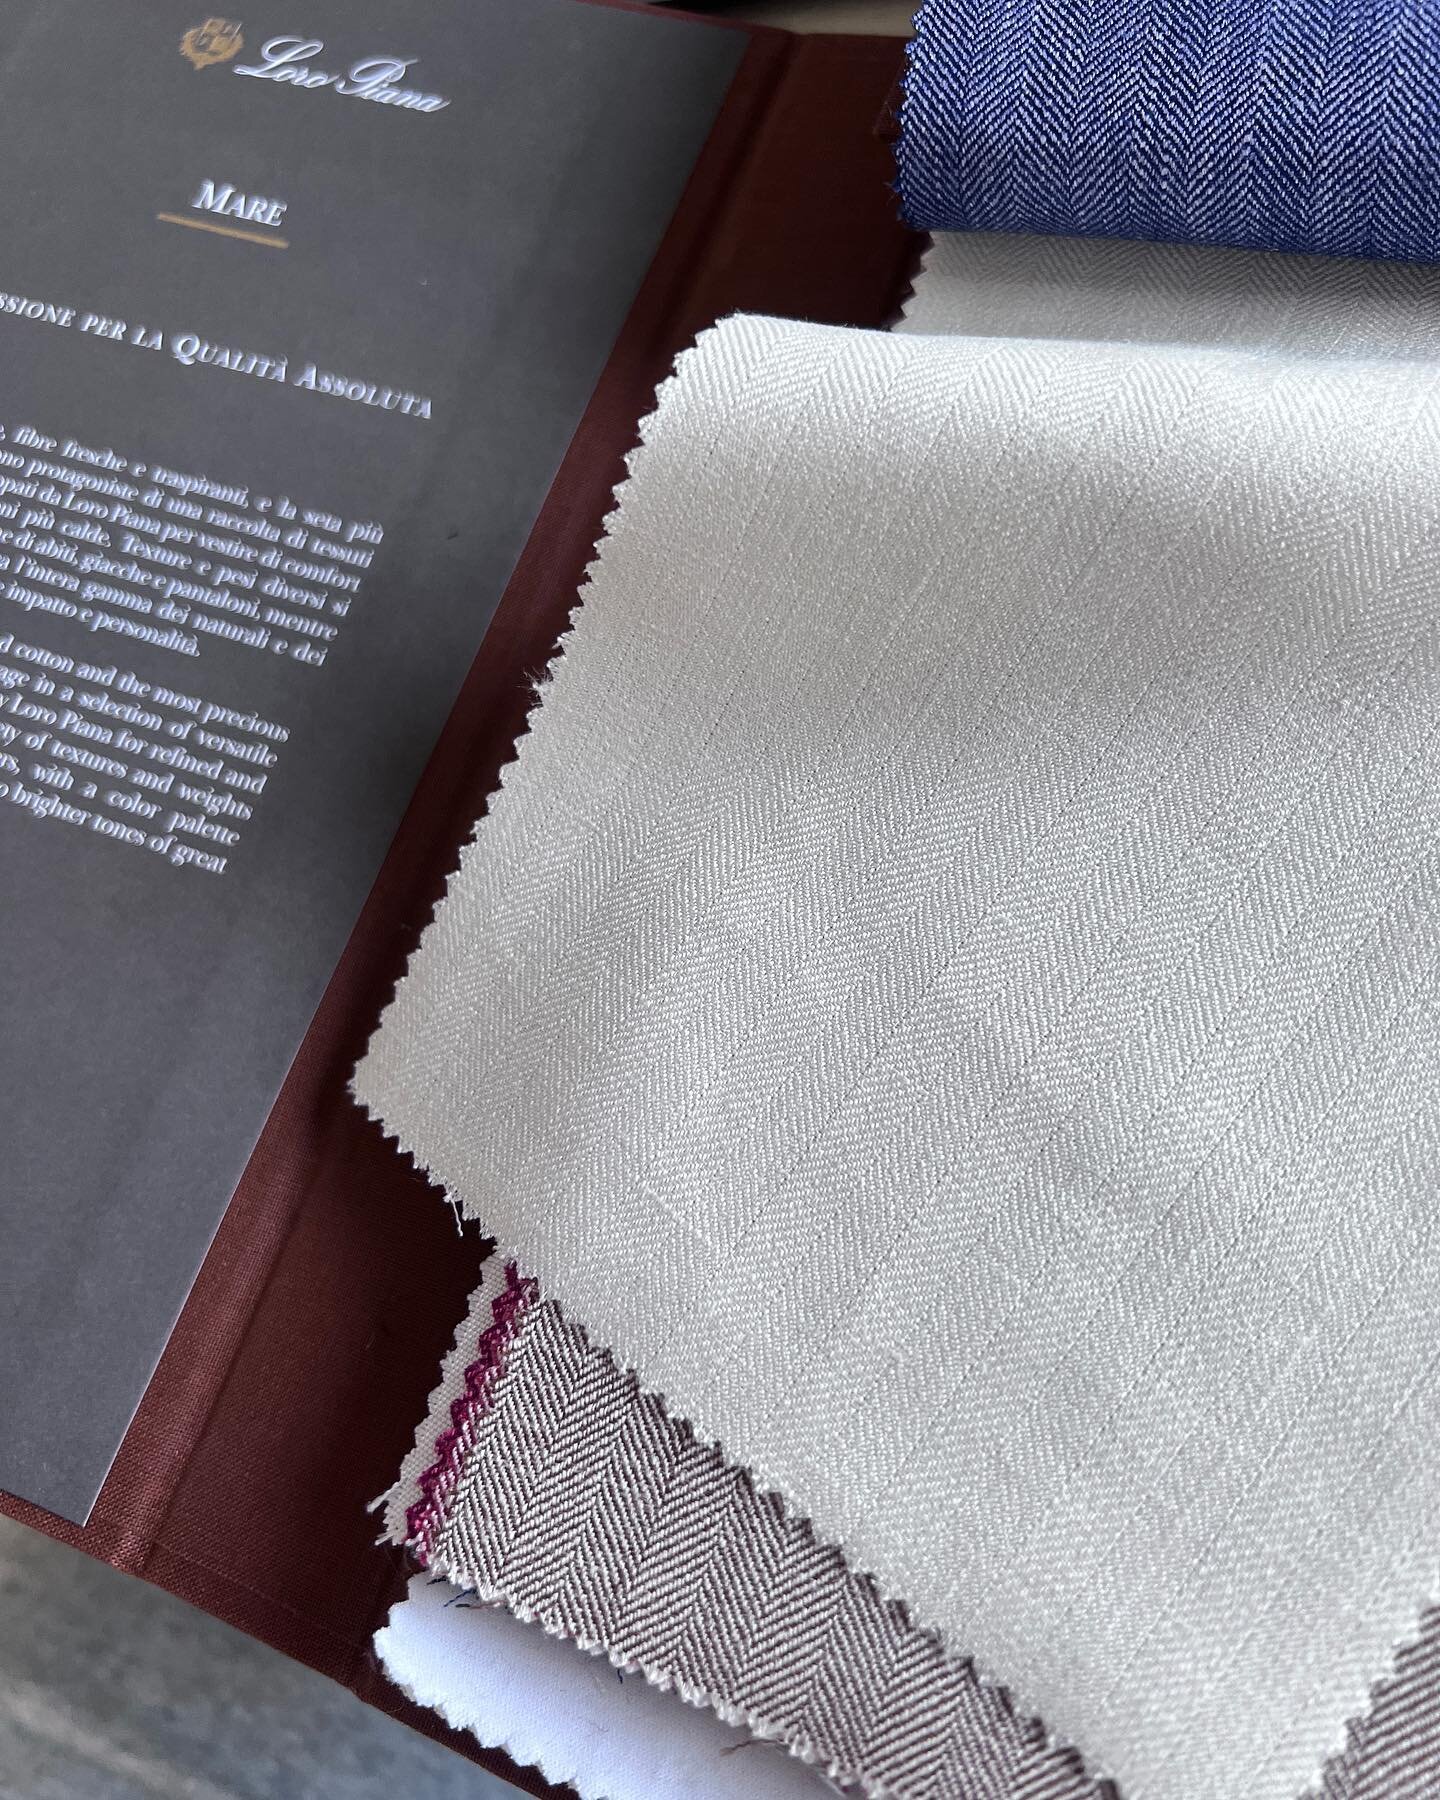 Wool/silk/linen blends are a Goldilocks fabric. They&rsquo;re light and airy from the linen, crease resistant from the wool, and have a little bit of luster and tensile strength from the silk. 

Loro Piana delivers on a specific client ask per usual.